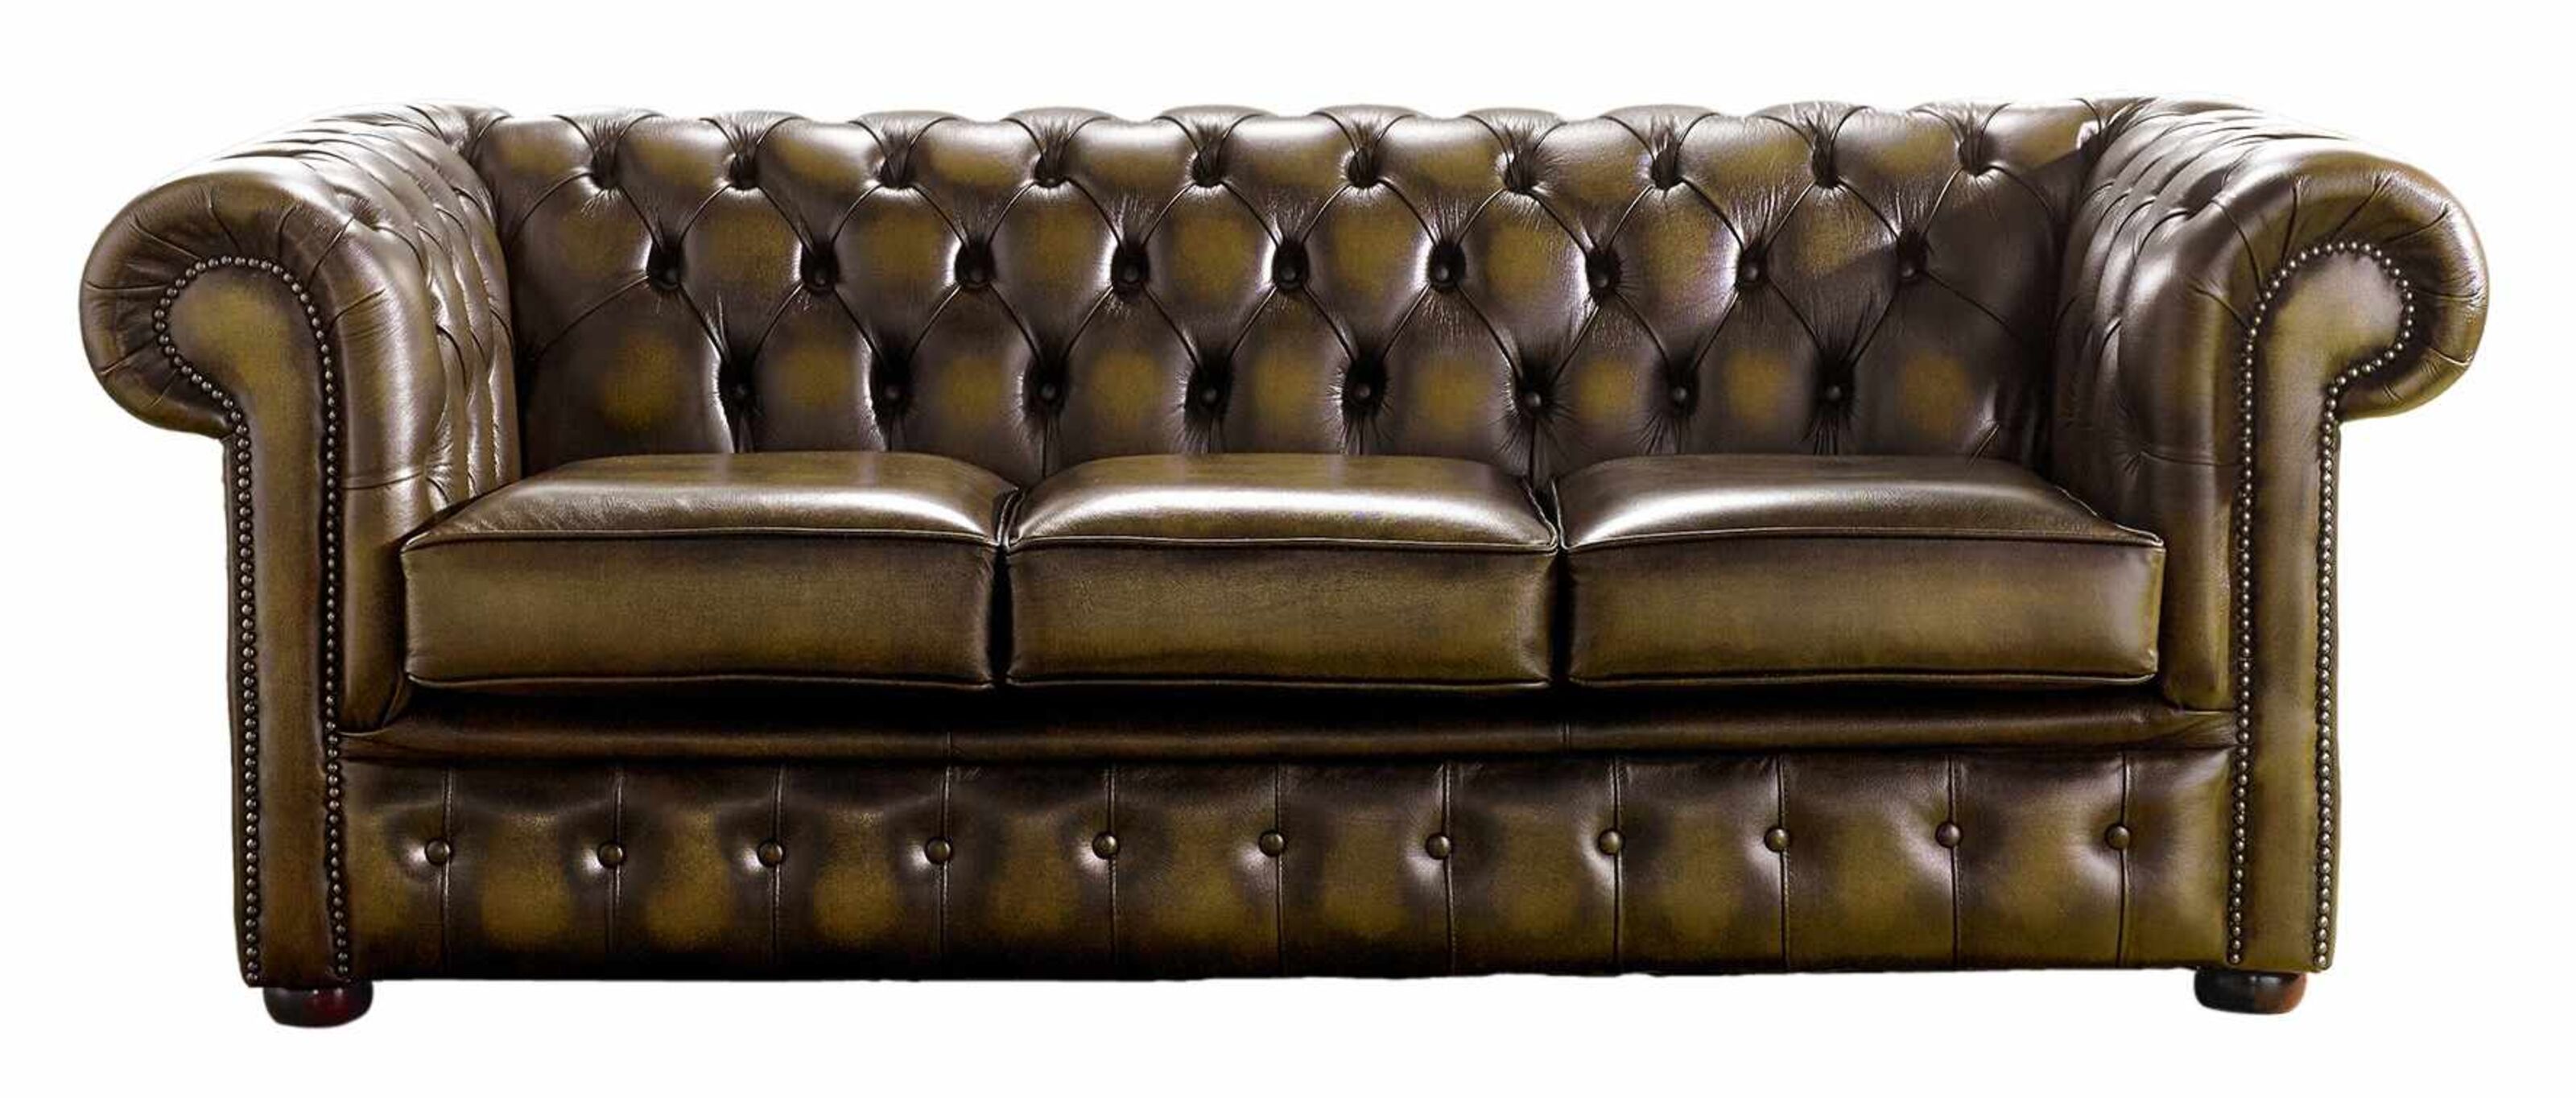 Sophisticated Simplicity: Exploring Grey Chesterfield Sofas  %Post Title